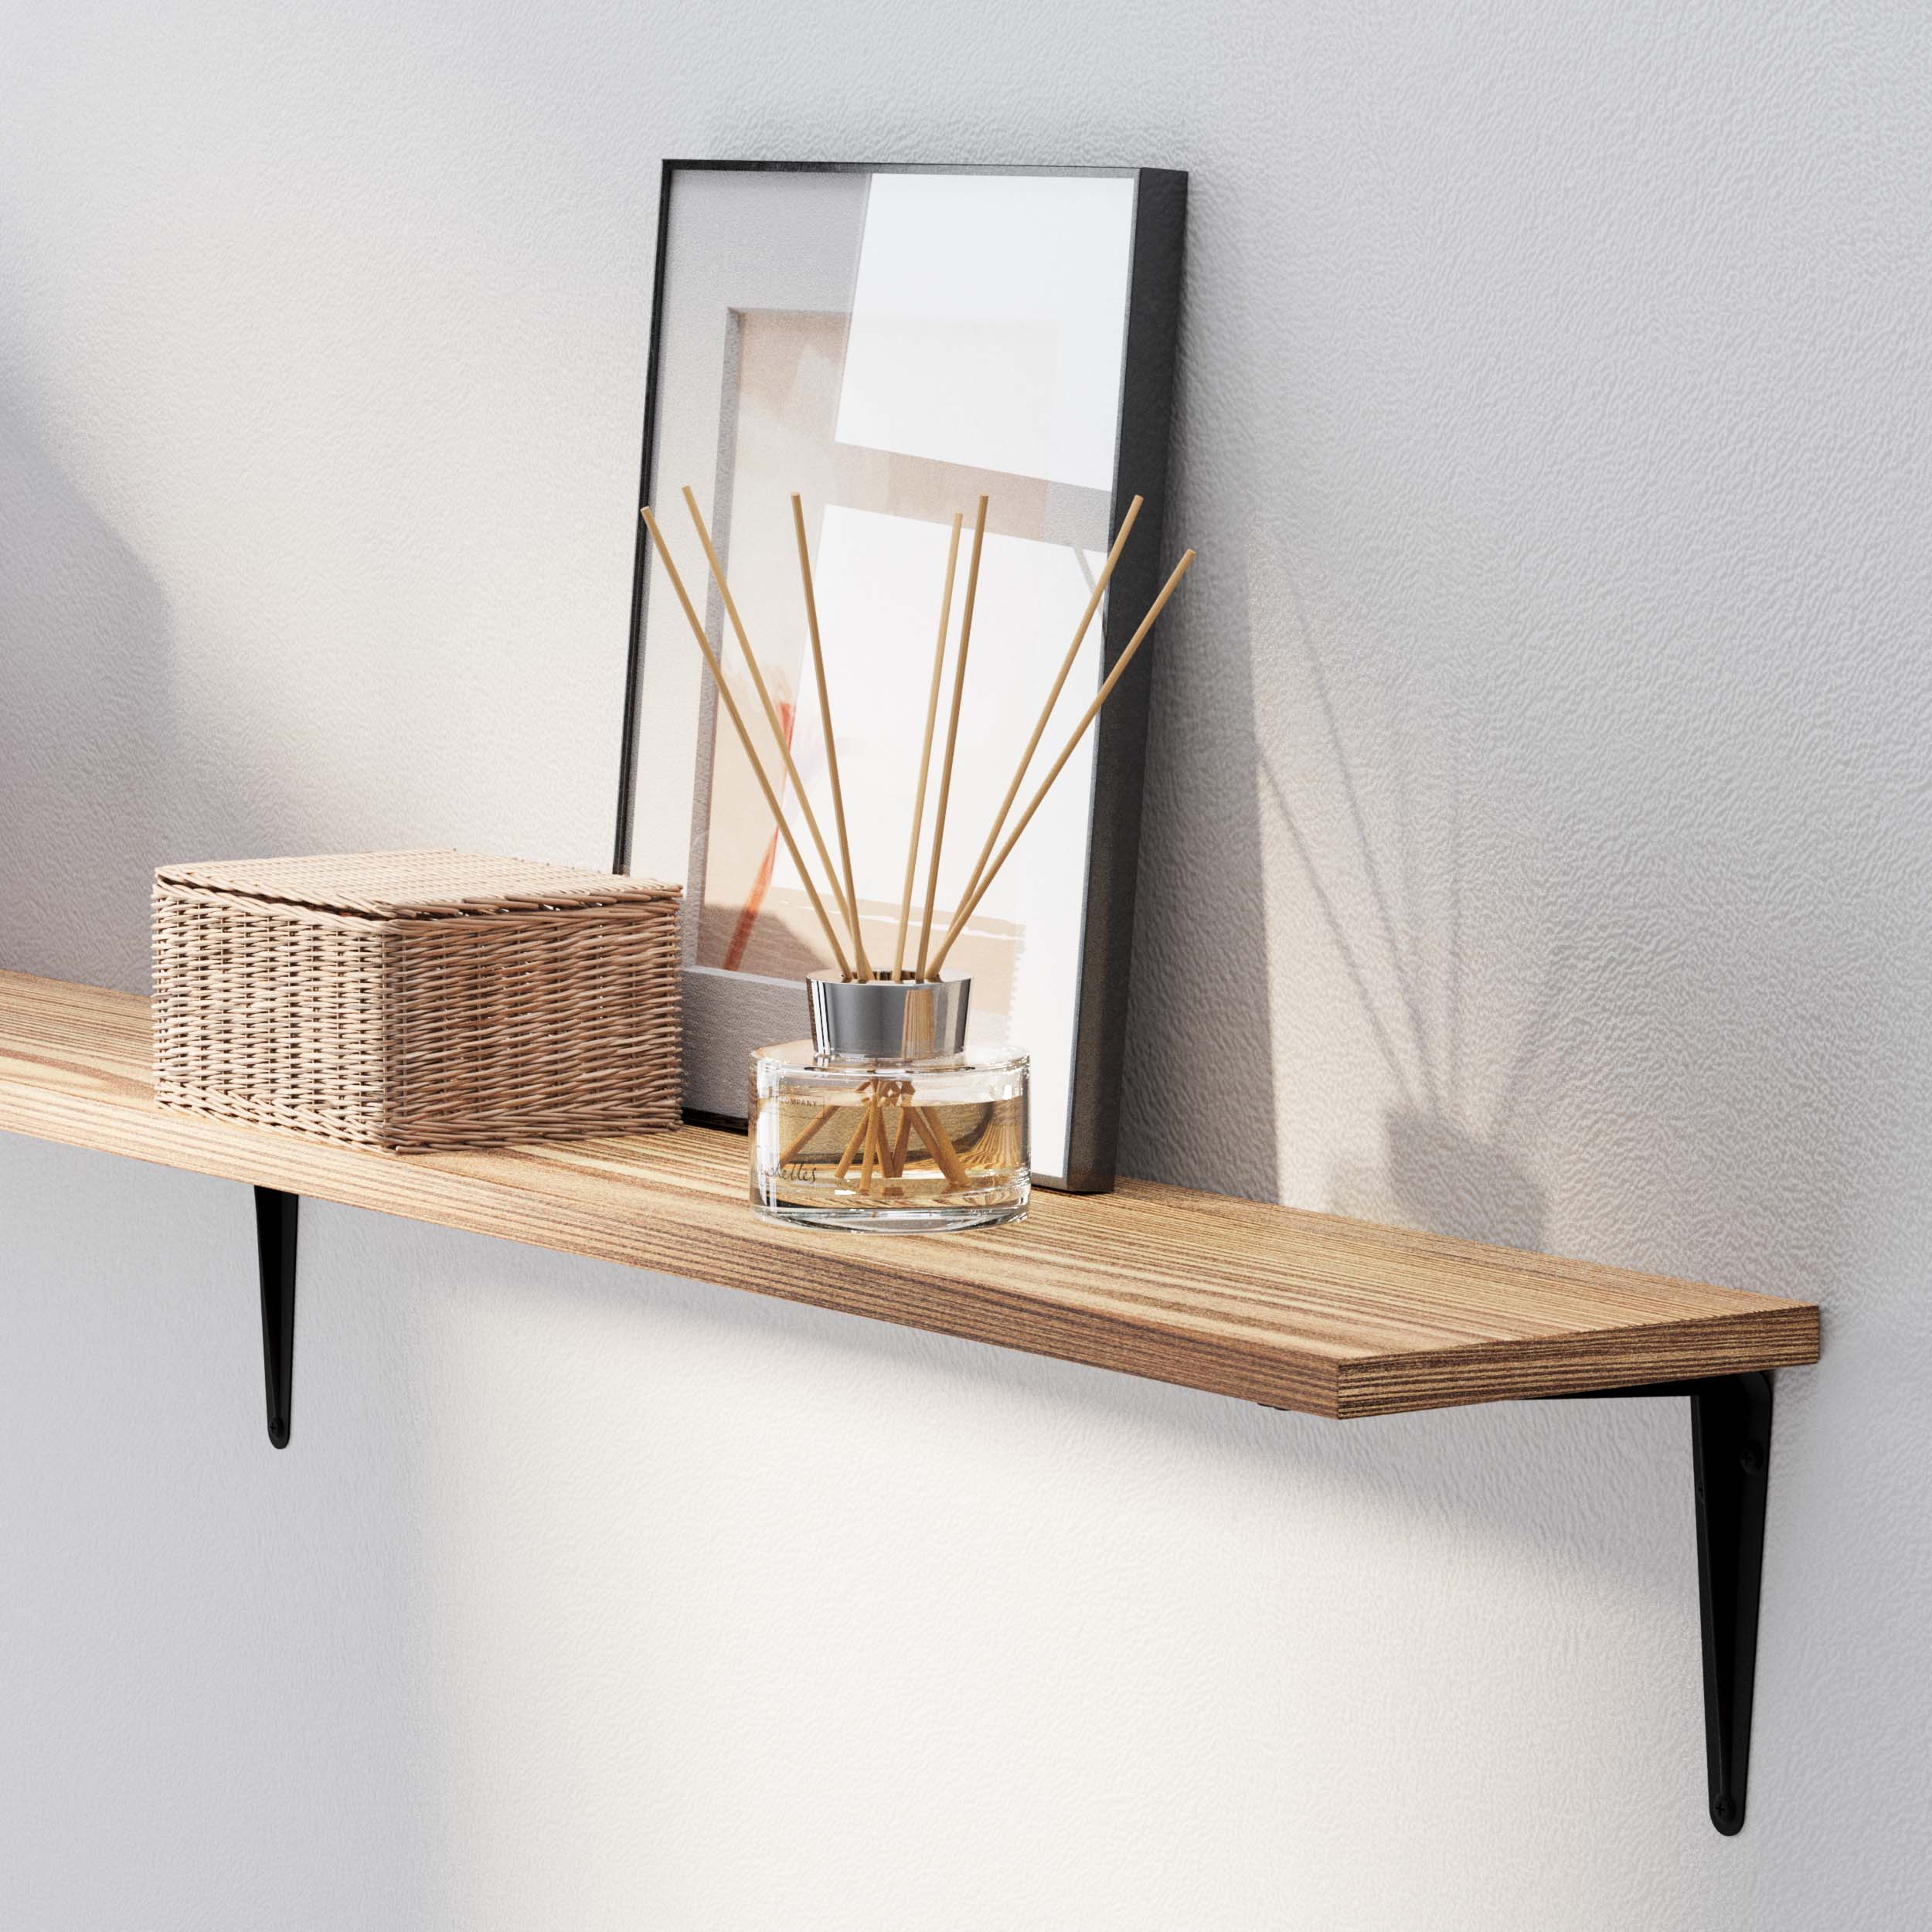 Burnt pantry shelf with a framed picture, a wicker basket, and a glass scent diffuser creating a serene vibe.